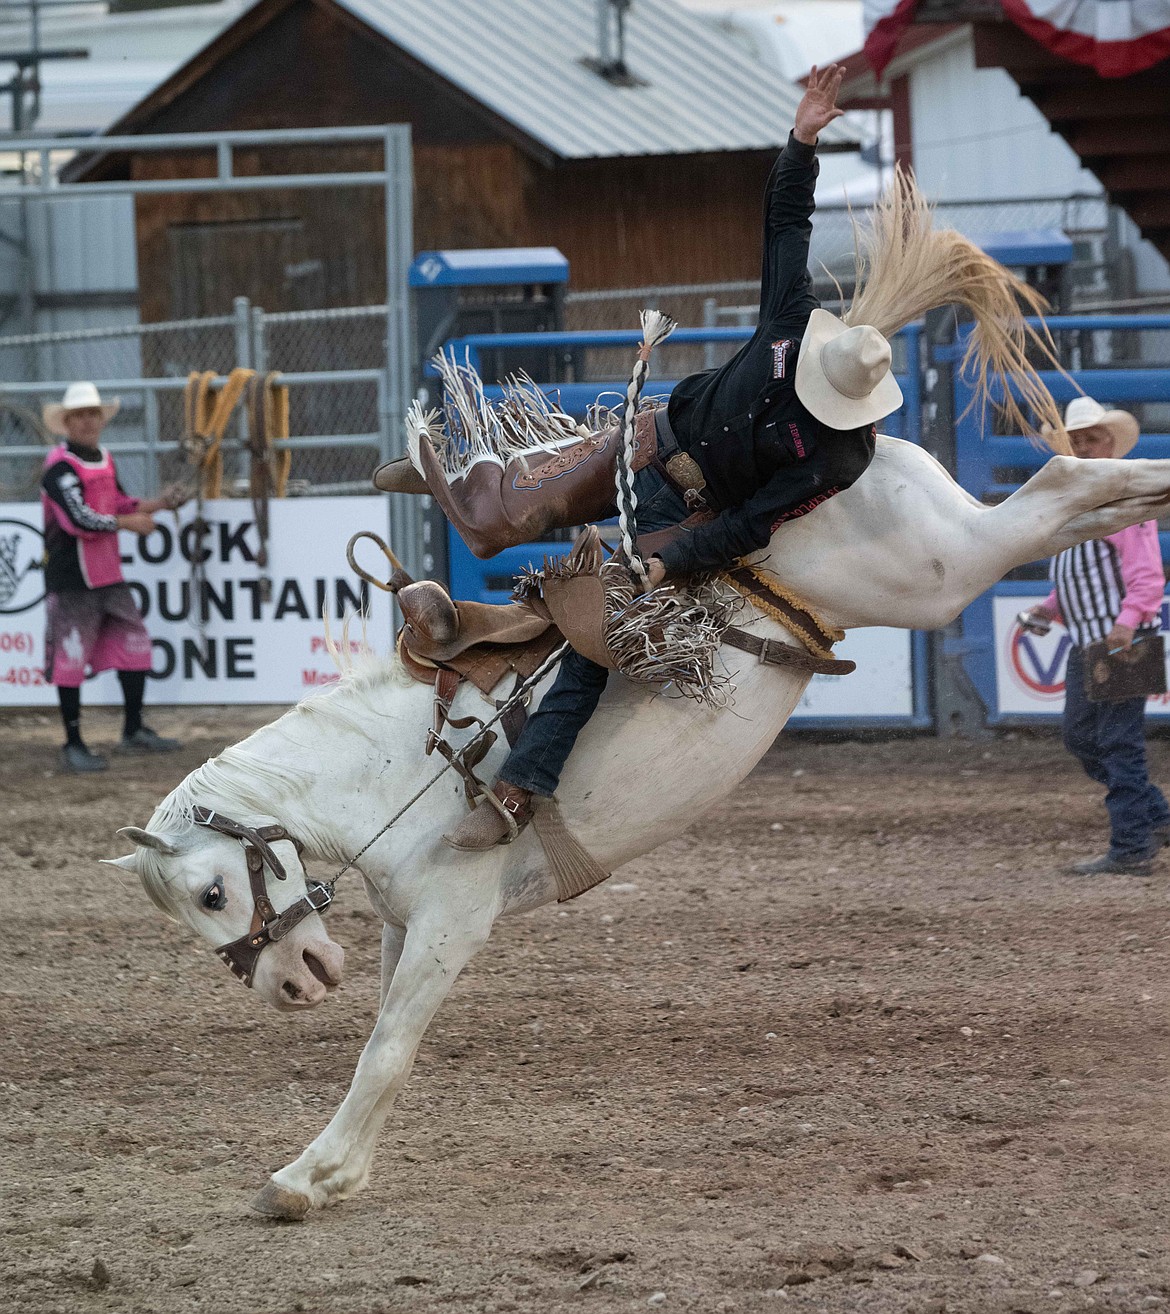 Scenes from the Sanders County Fair and Rodeo in Plains over Labor Day weekend. (Tracy Scott/Valley Press)